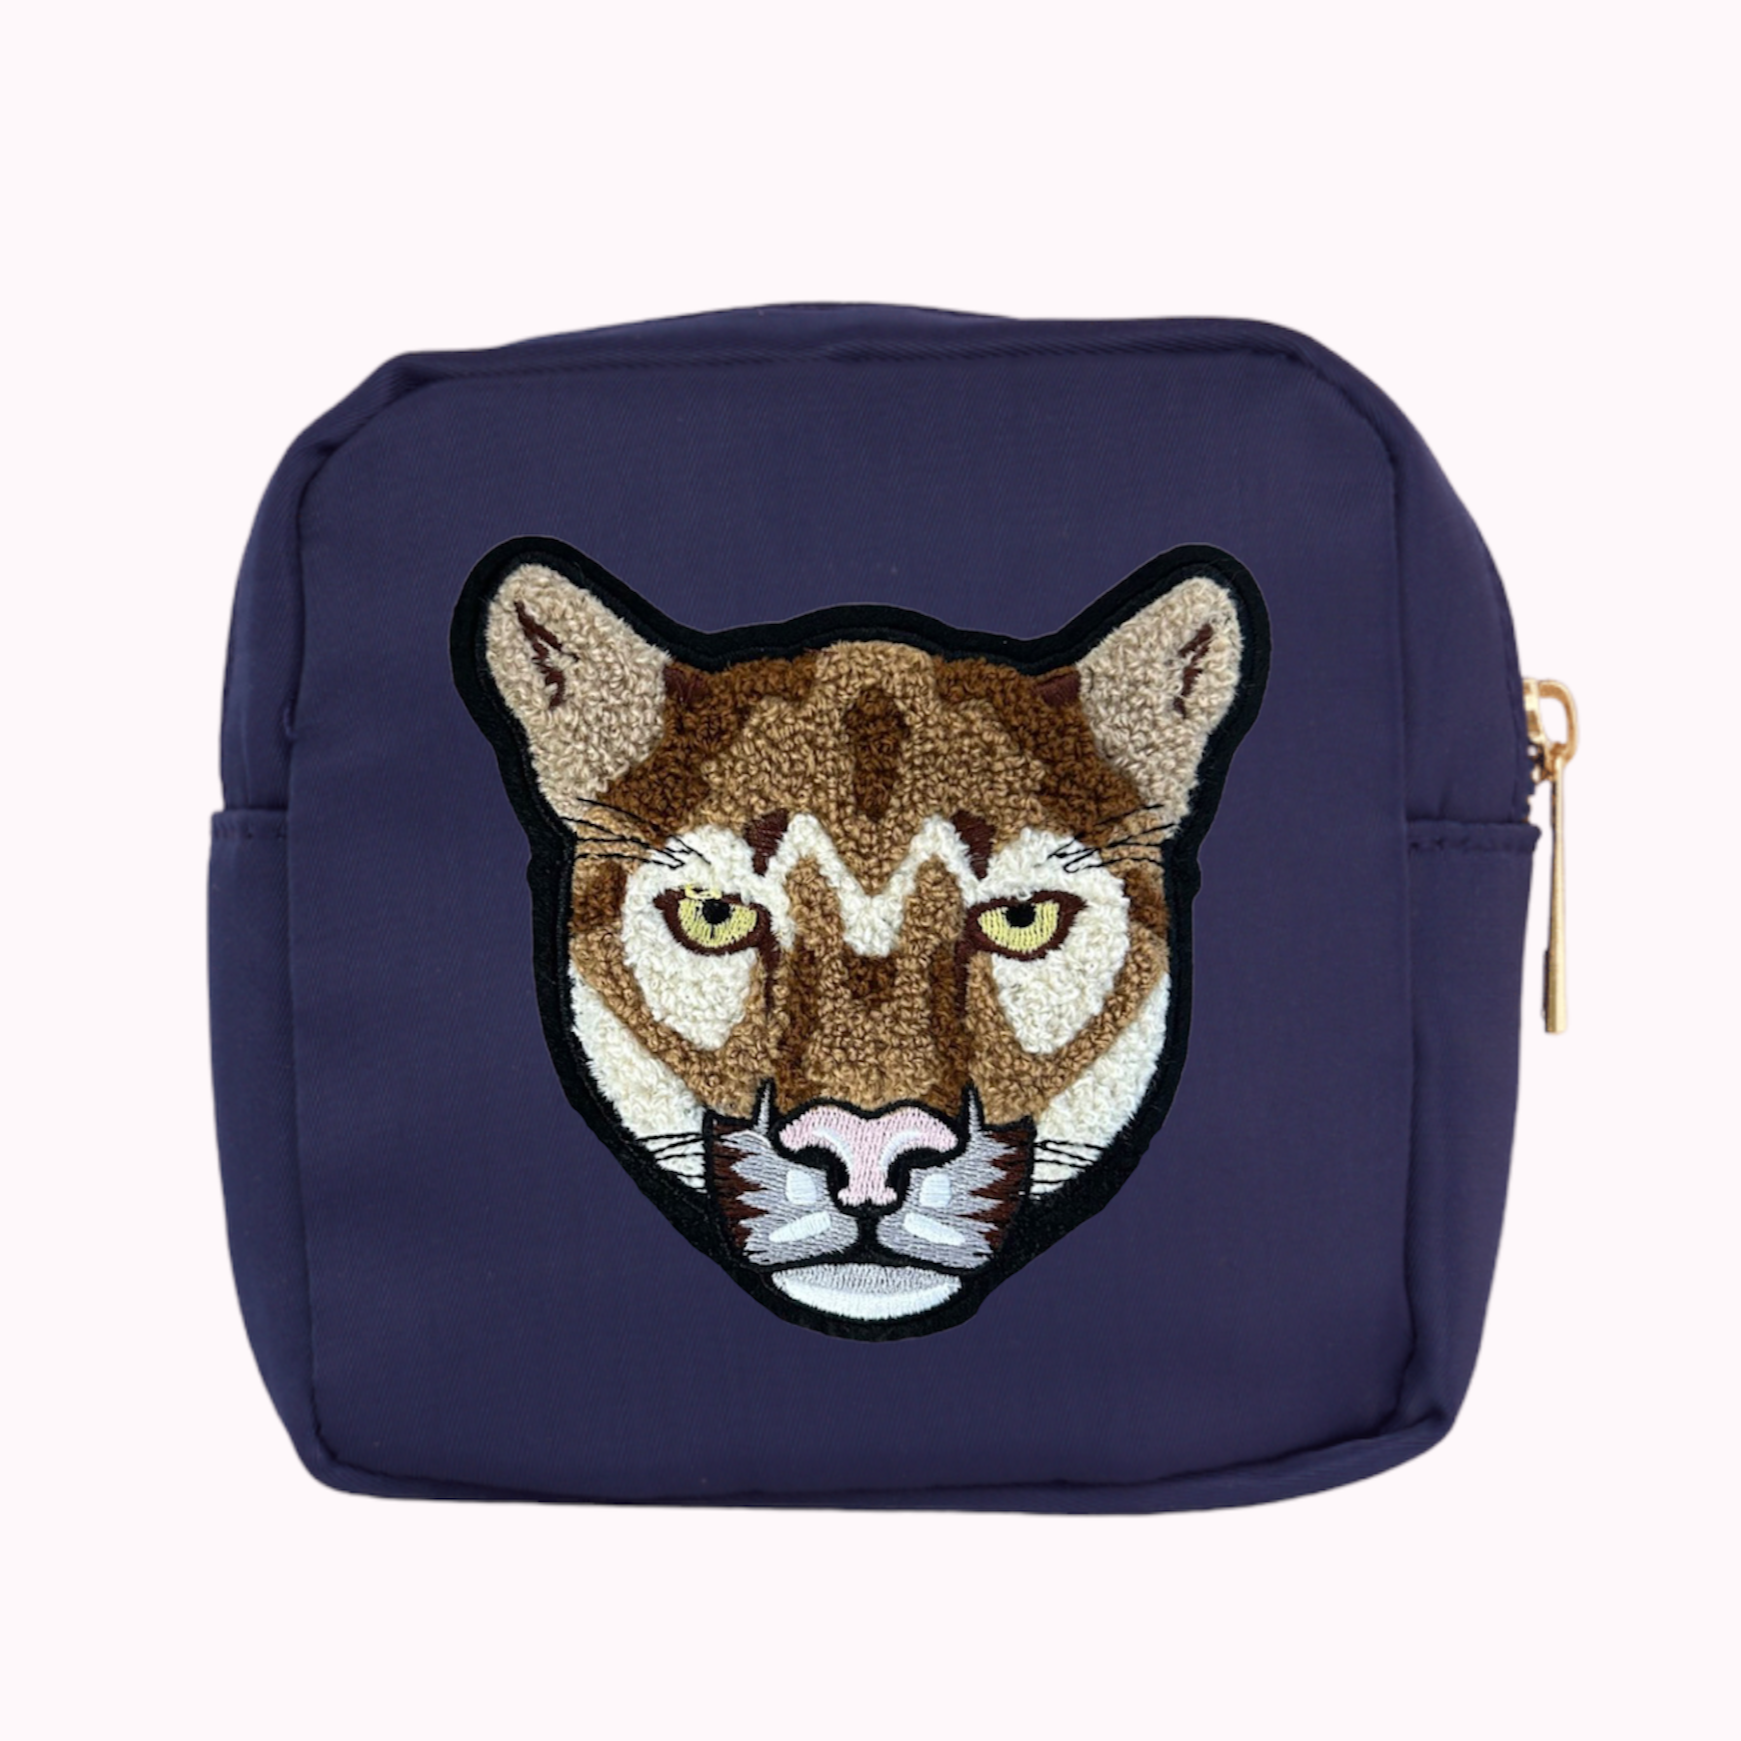 Navy mini crossbody bag with cougar patch. 